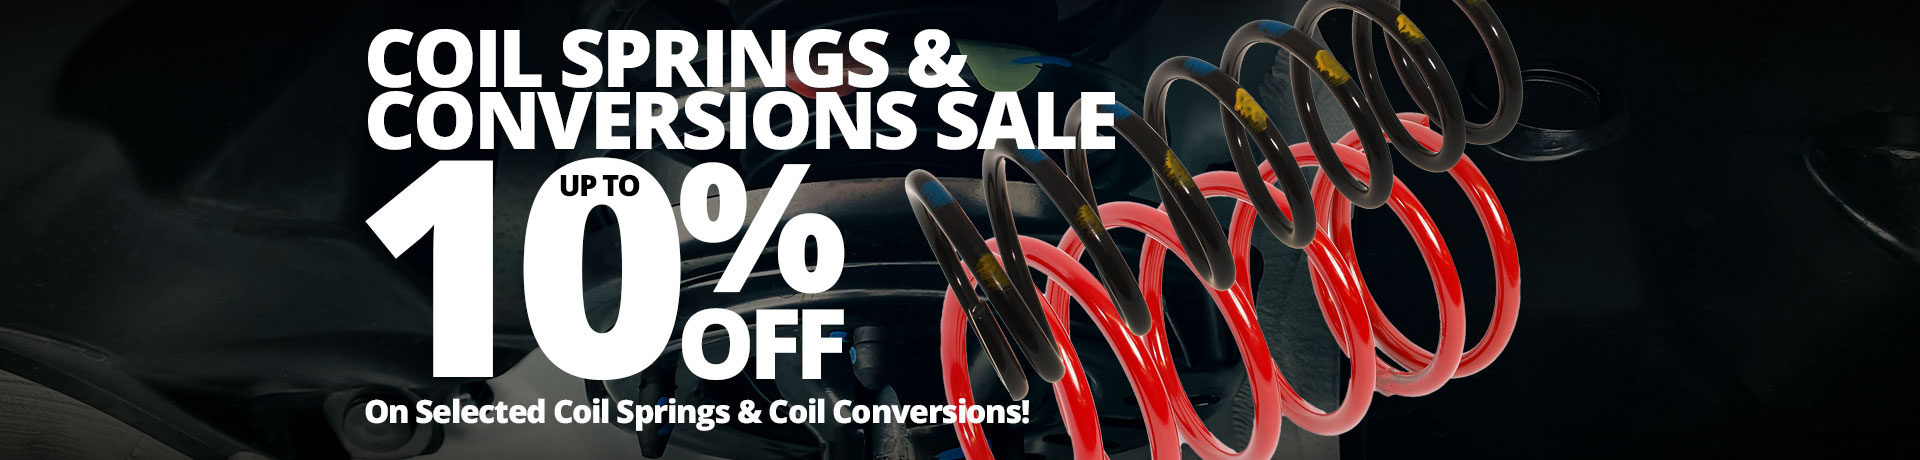 Up to 10% off Coil Springs & Coil Conversions